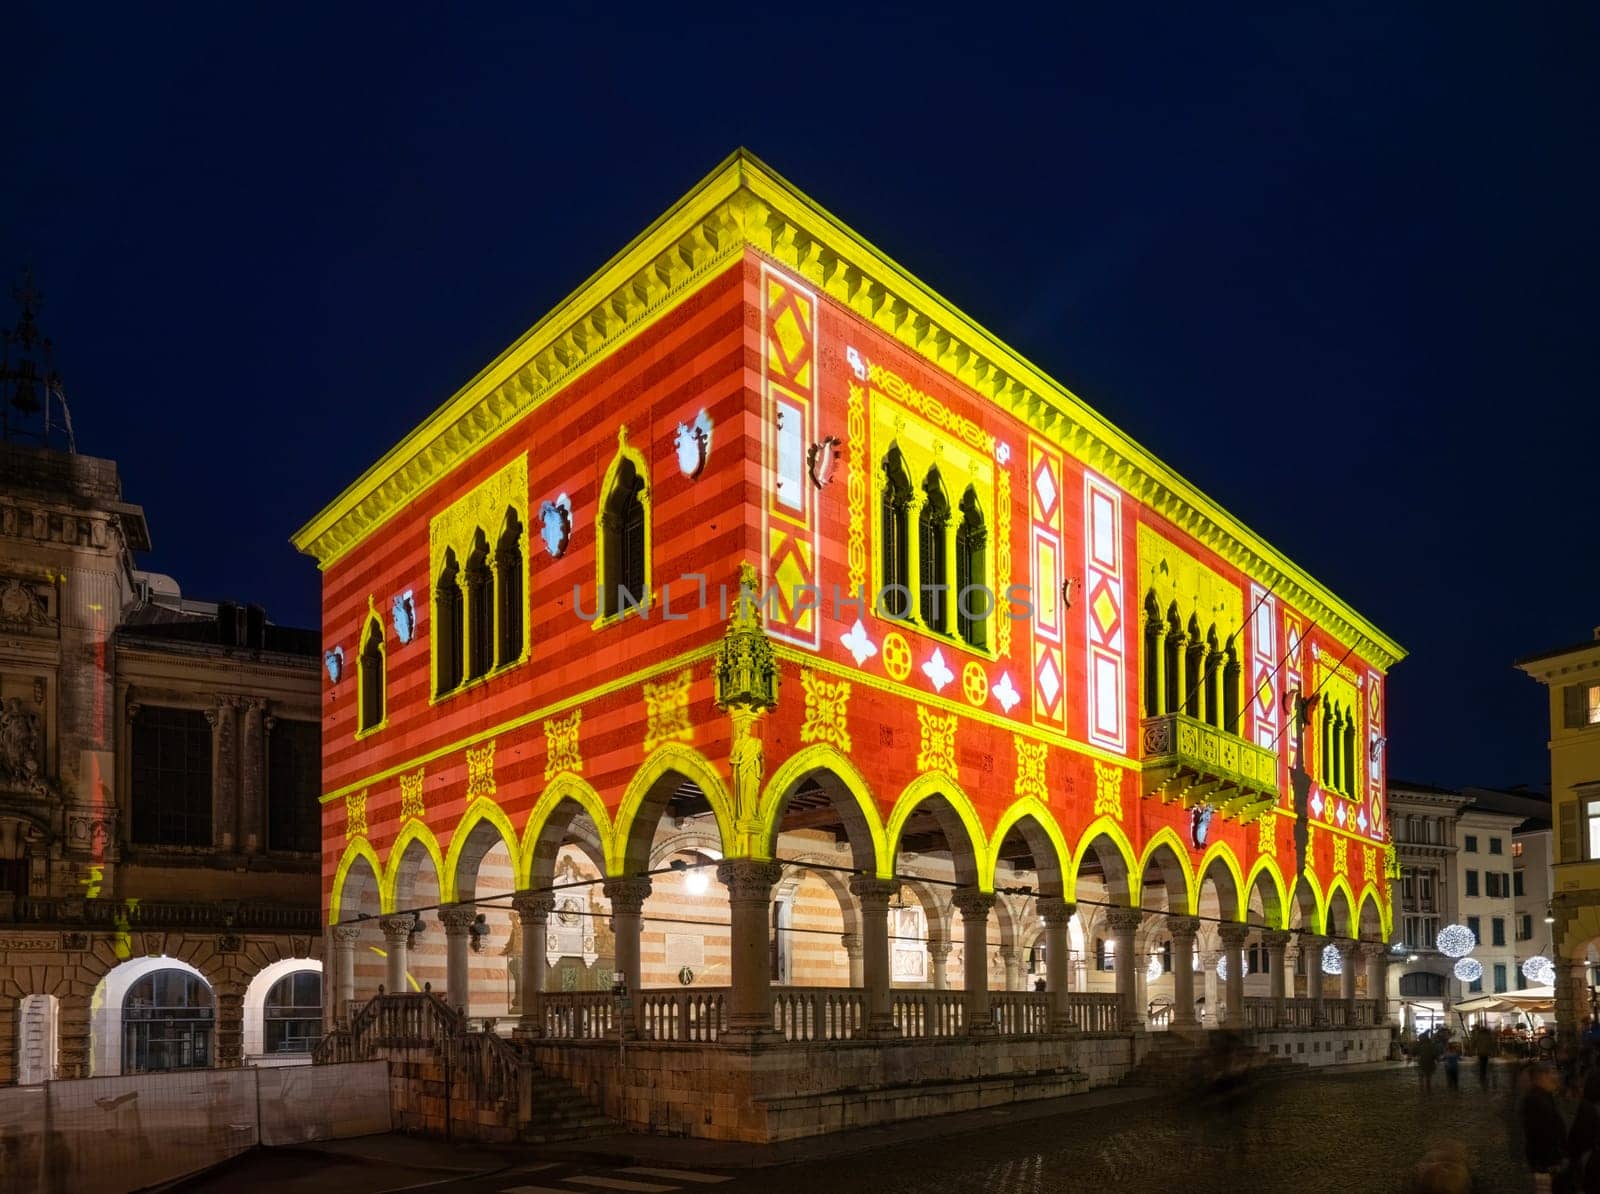 Christmas light decorations projected on the palaces in Udine, Italy by sergiodv